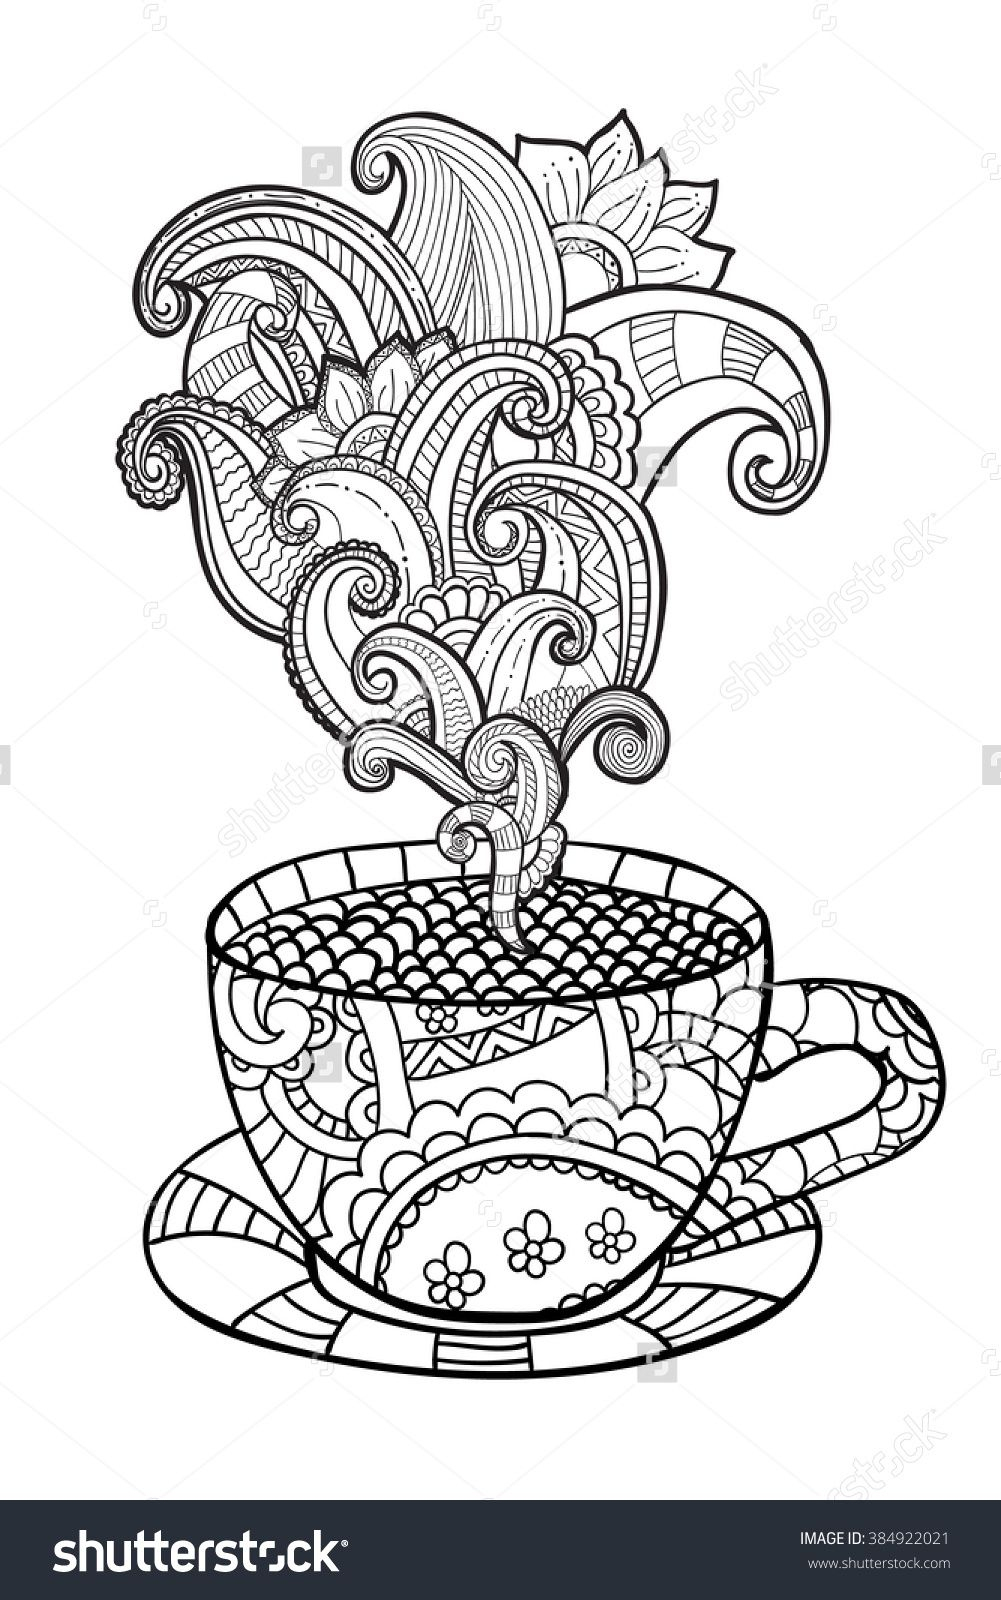 Coffee Or Tea Cup Zentangle Style Coloring Page 384922021 - Free Printable Tea Cup Coloring Pages